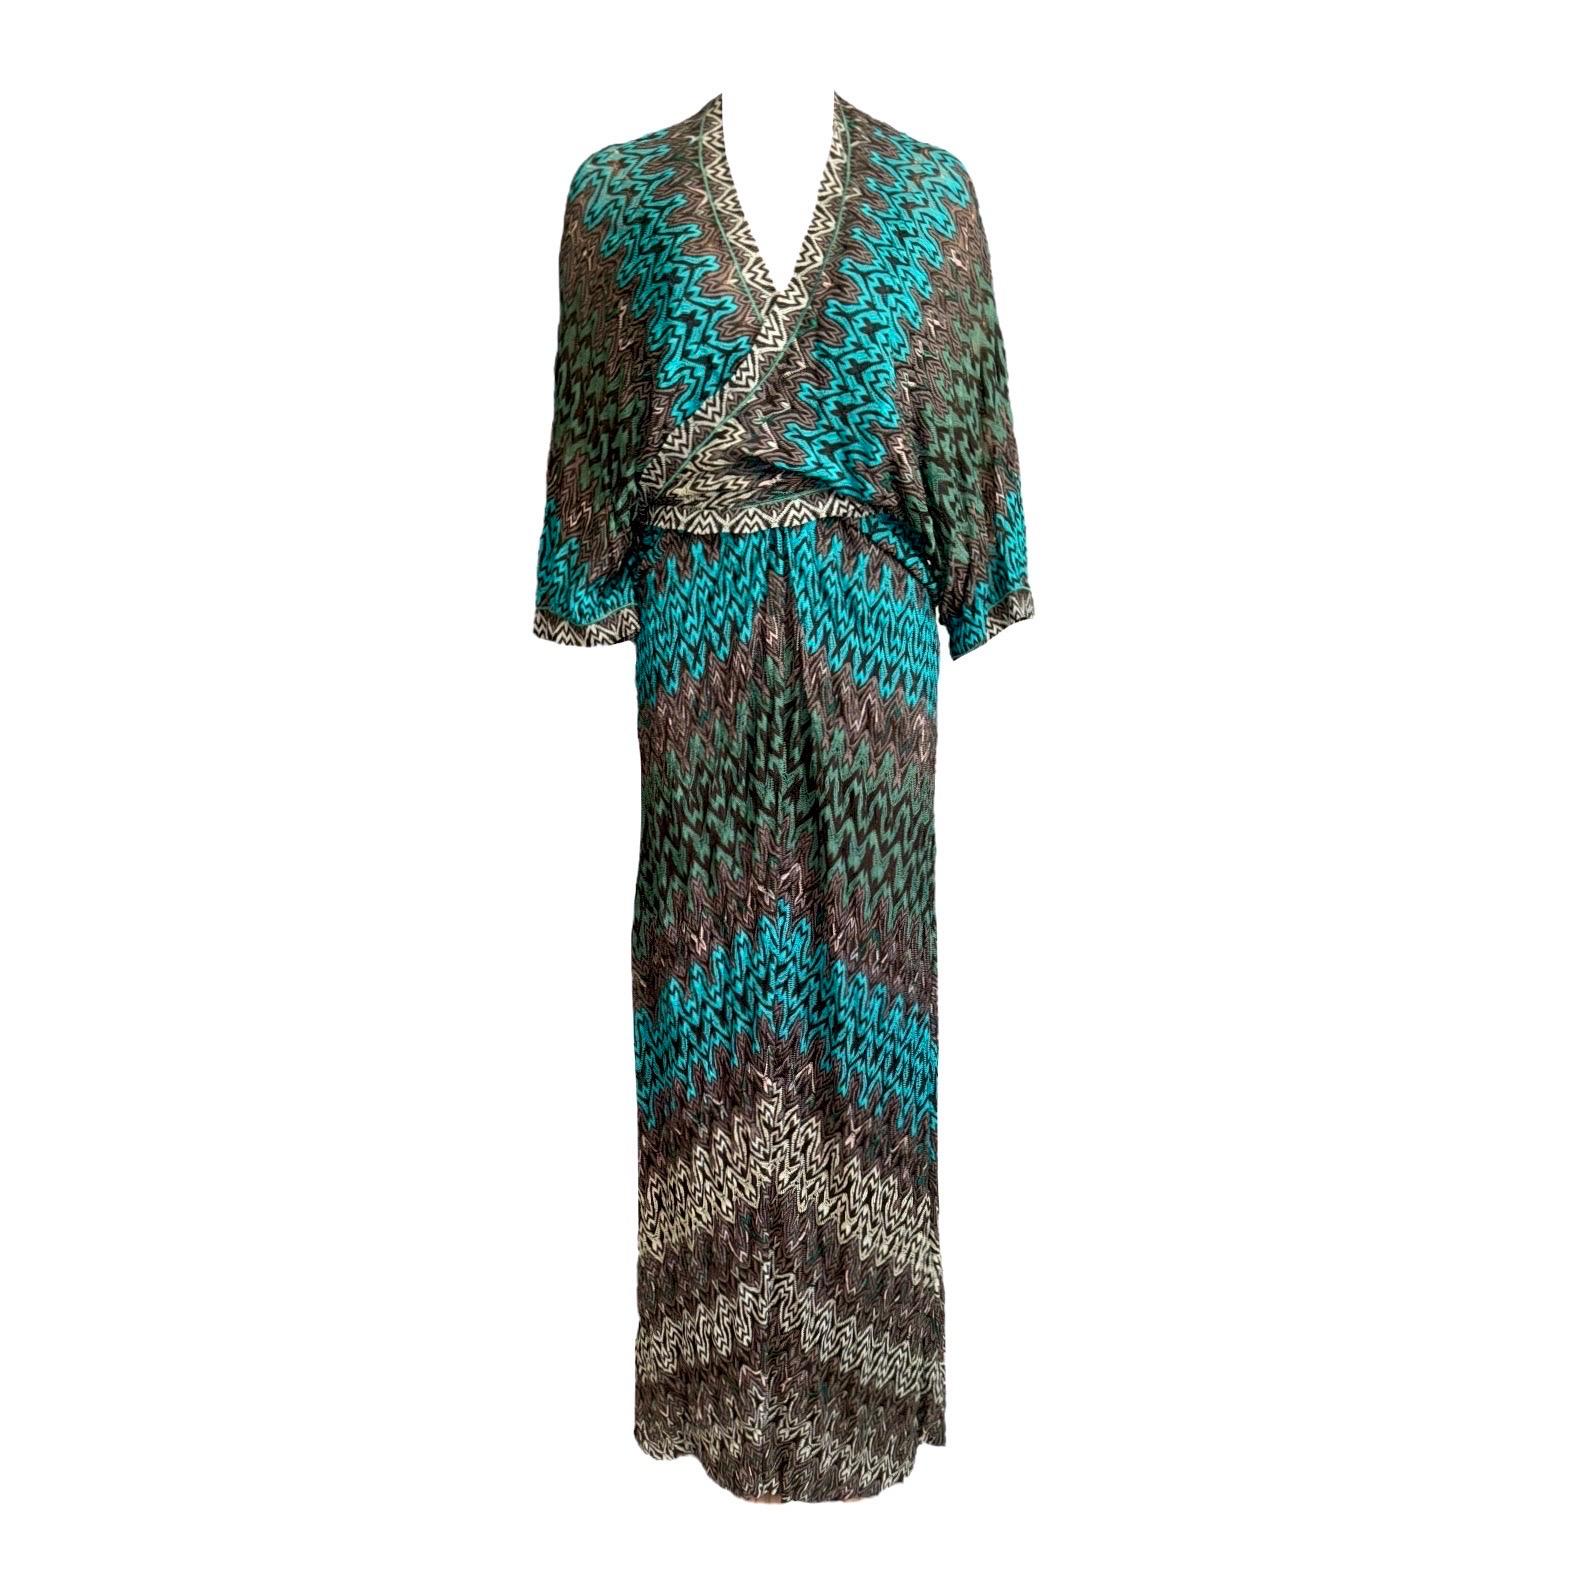 NEW Missoni 2PC Dramatic Deep Neck Crochet Knit Evening Dress Gown & Cardigan 40 For Sale 4